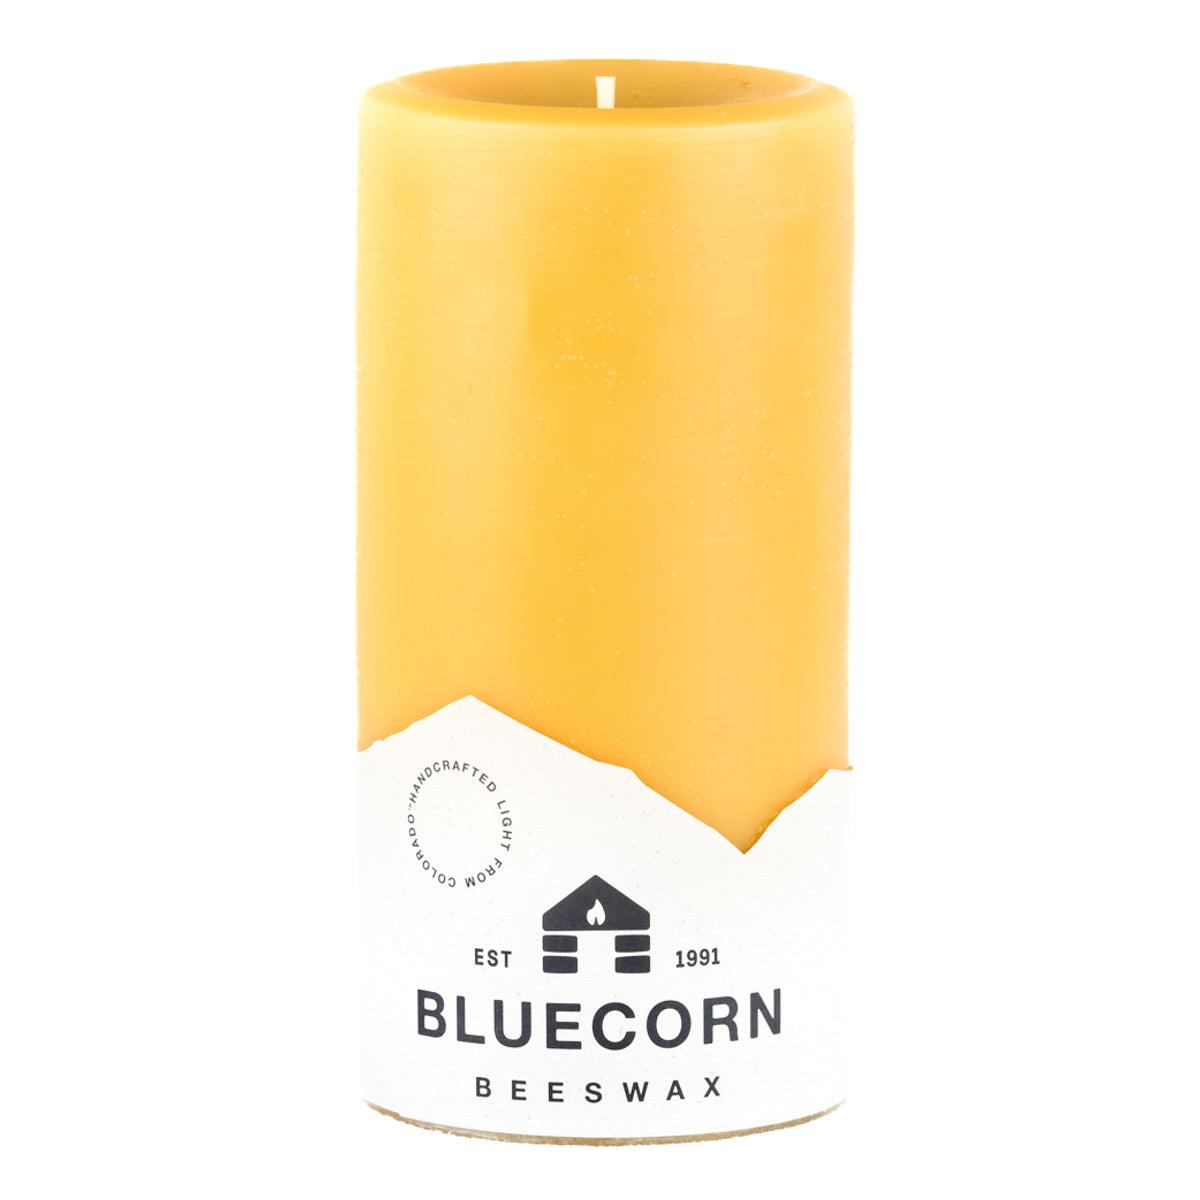 beeswax pillar candle 4" wide by 8" tall, golden, unscented pure beeswax candle from Bluecorn Candles